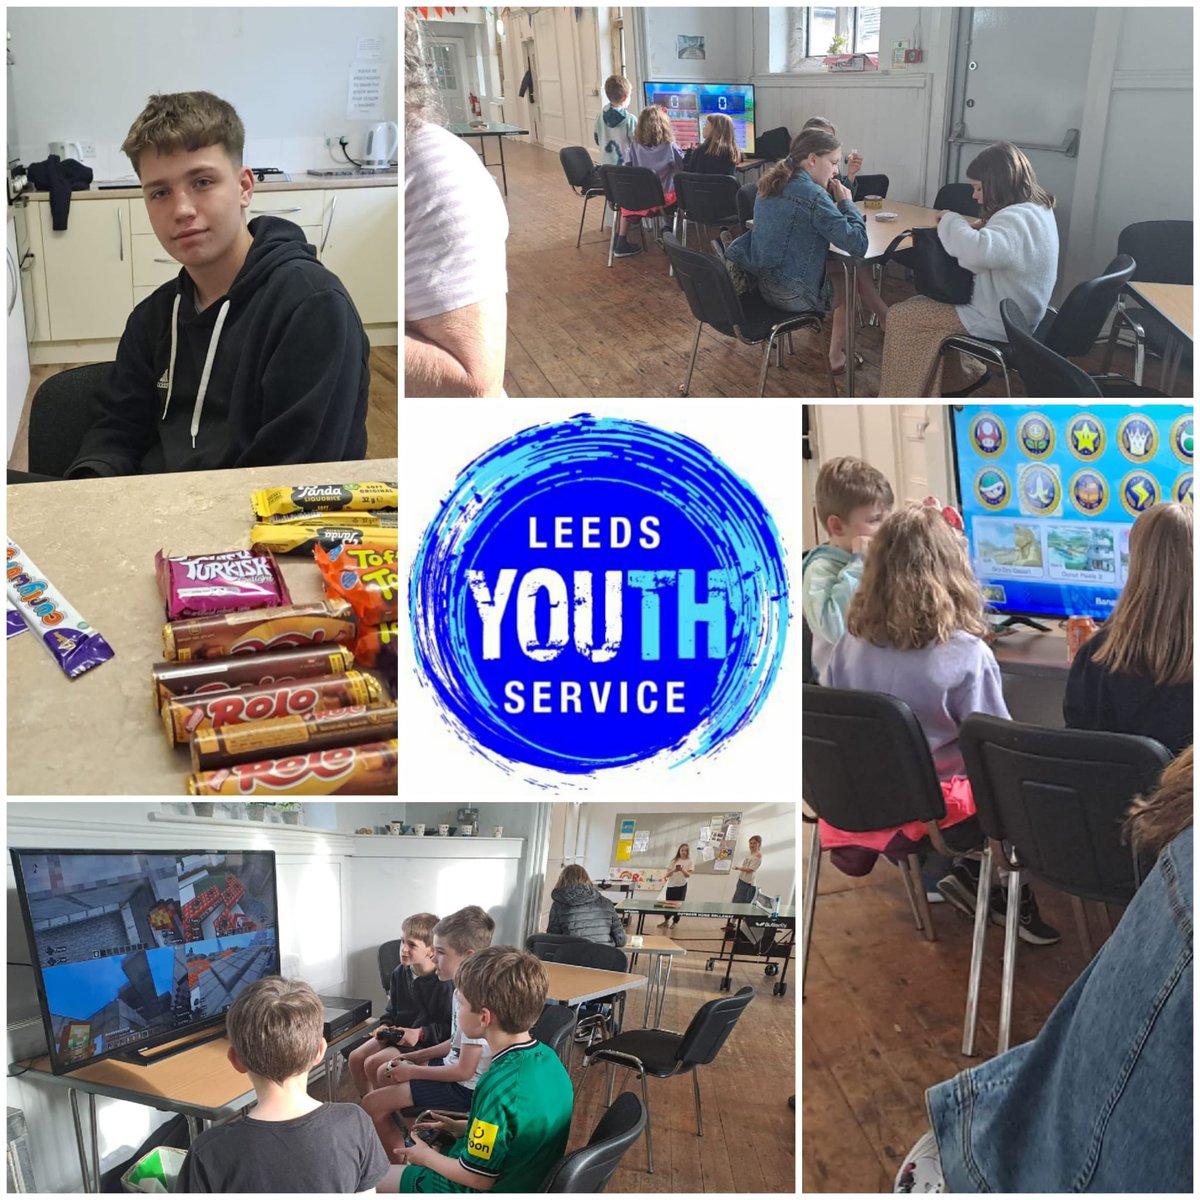 Lots happening at our #Thorner #Youthclub this evening. Discussions focussed on #MentalHealthAwarenessWeek alongside our regular activities 

Big thanks to our #Youth #Volunteer for supporting our #Youthwork team

#LeedsYouthService